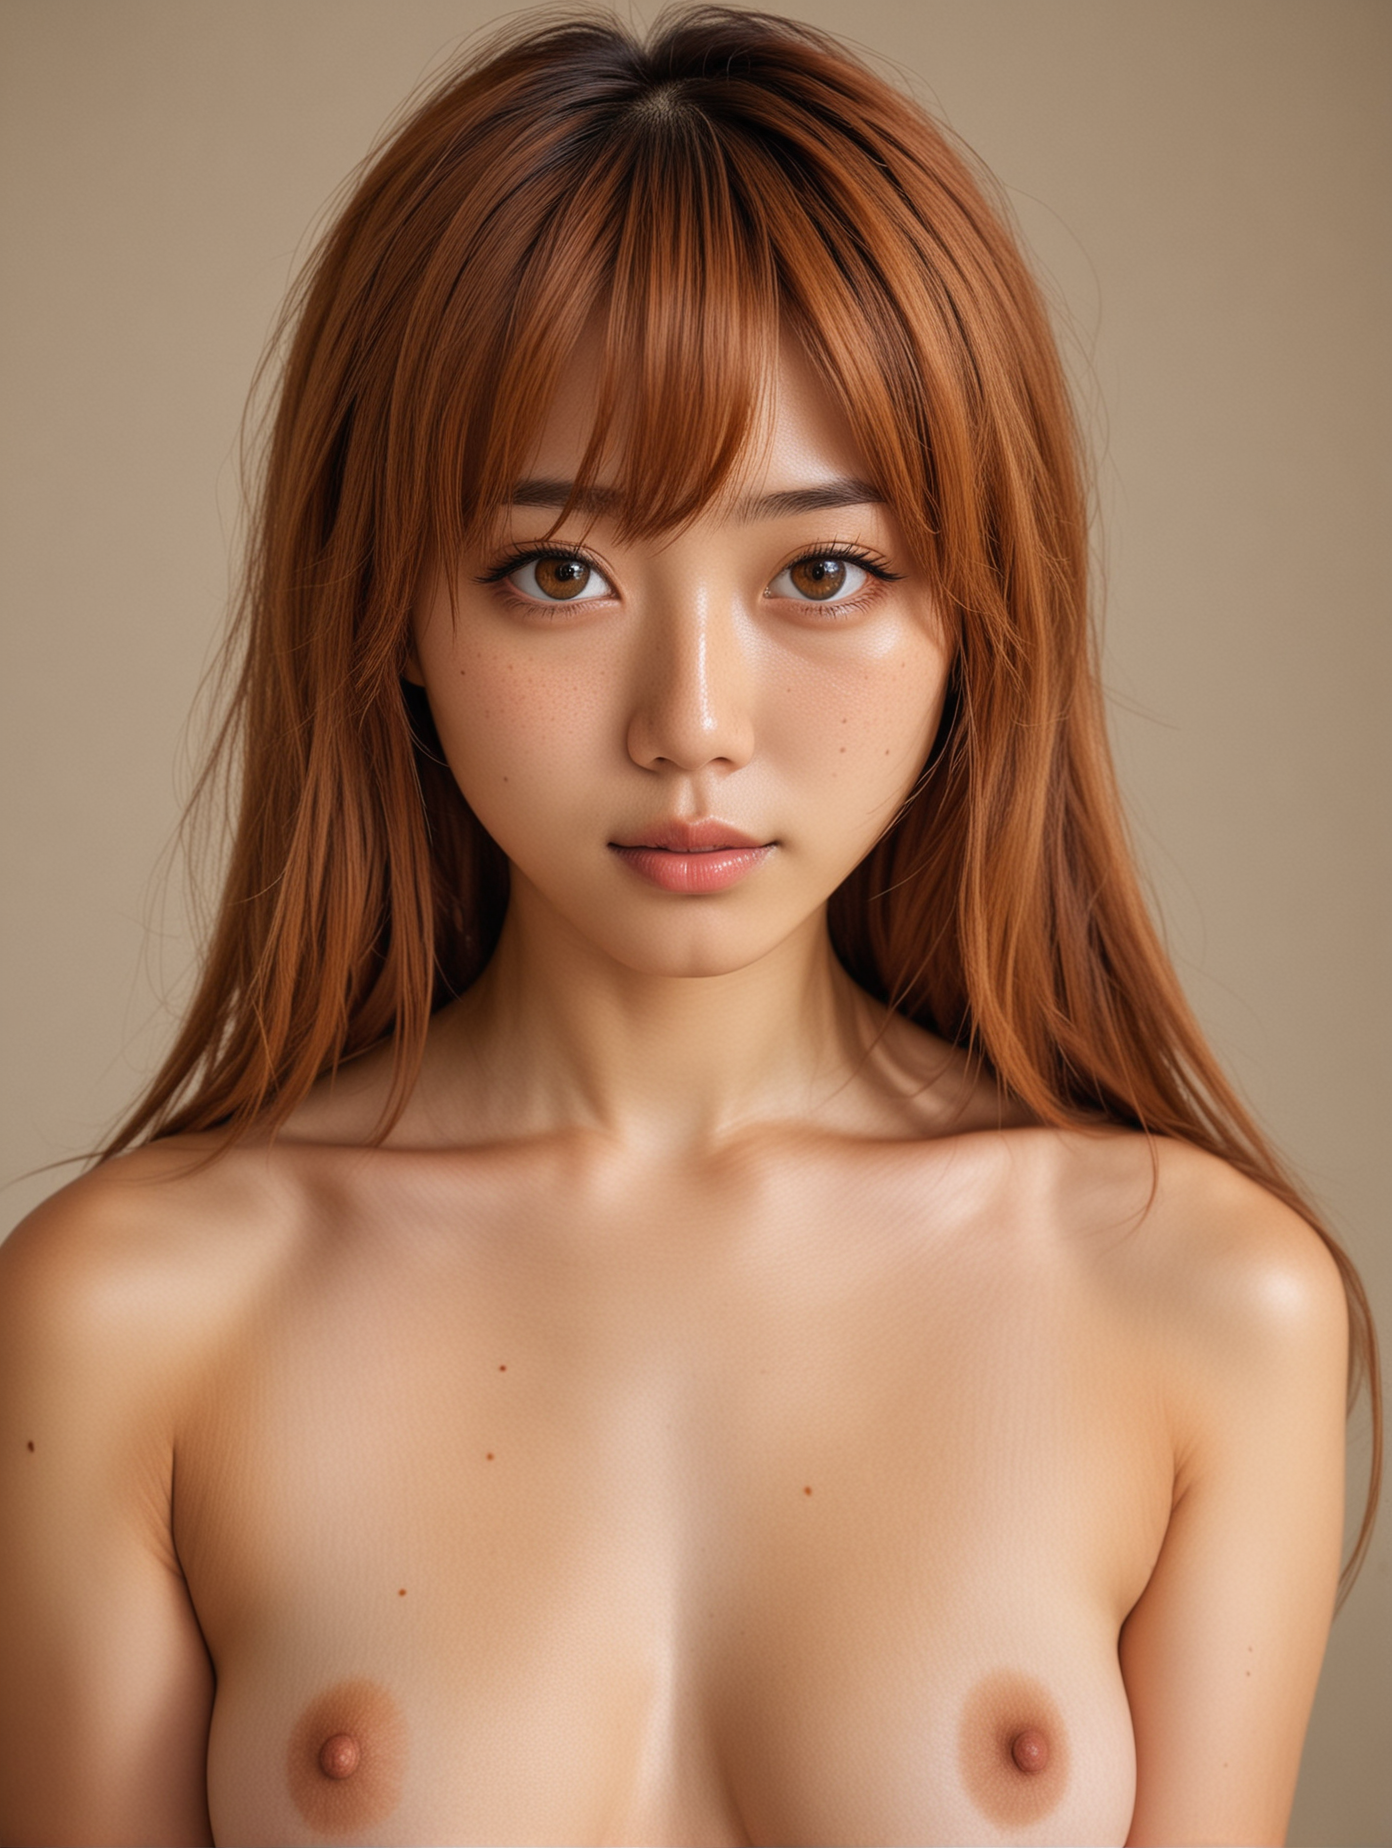 Nude Japanese Girl with CaramelColored Hair and Freckles